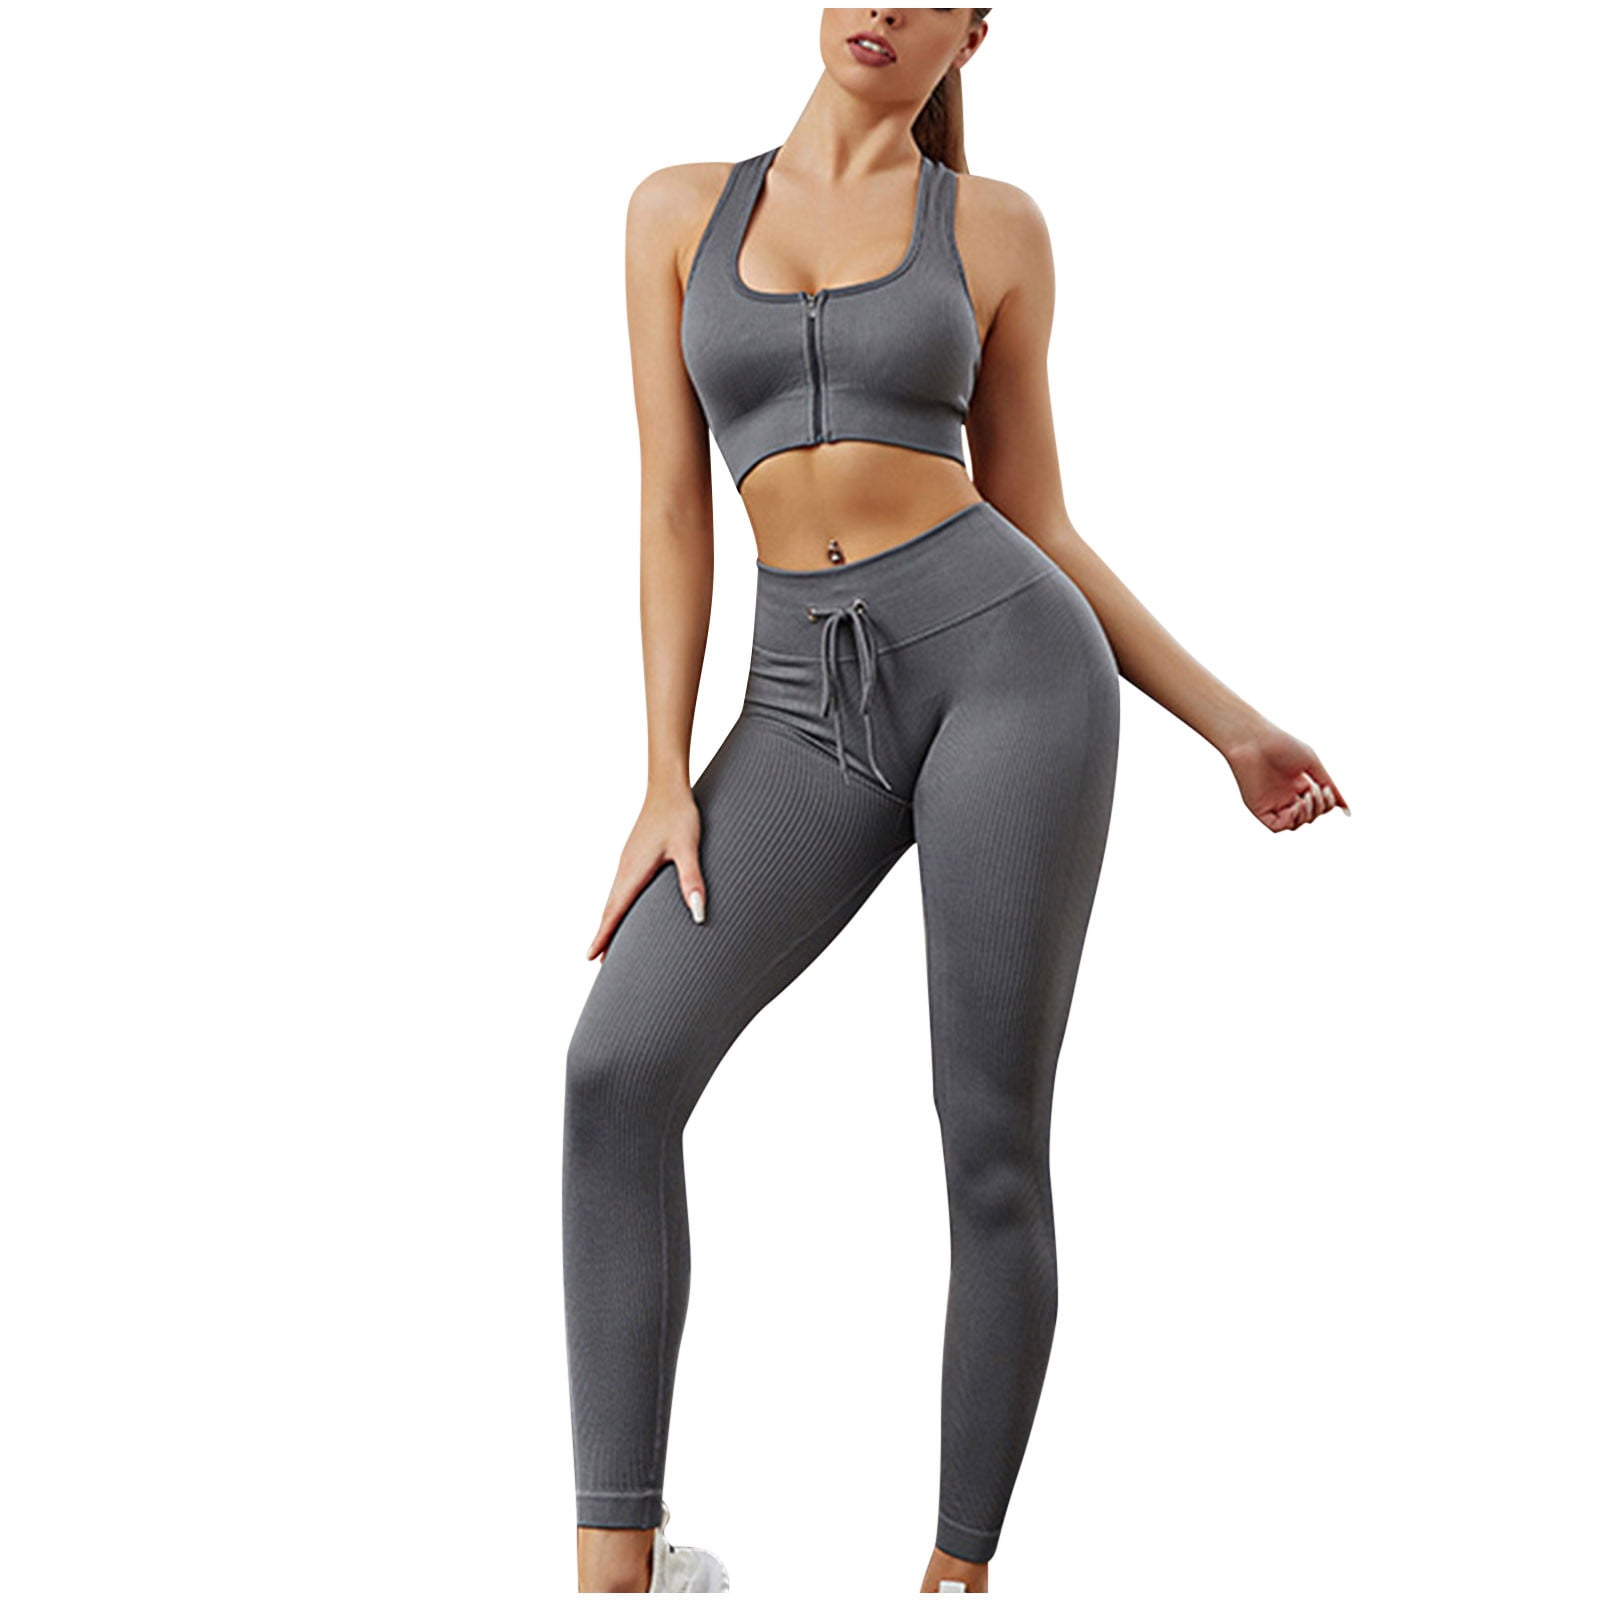 Workout Outfit for Women 2 Piece High Waist Drawstring Ribbed Leggings with  Zipper Sports Bra Gym Fitness Yoga Set 